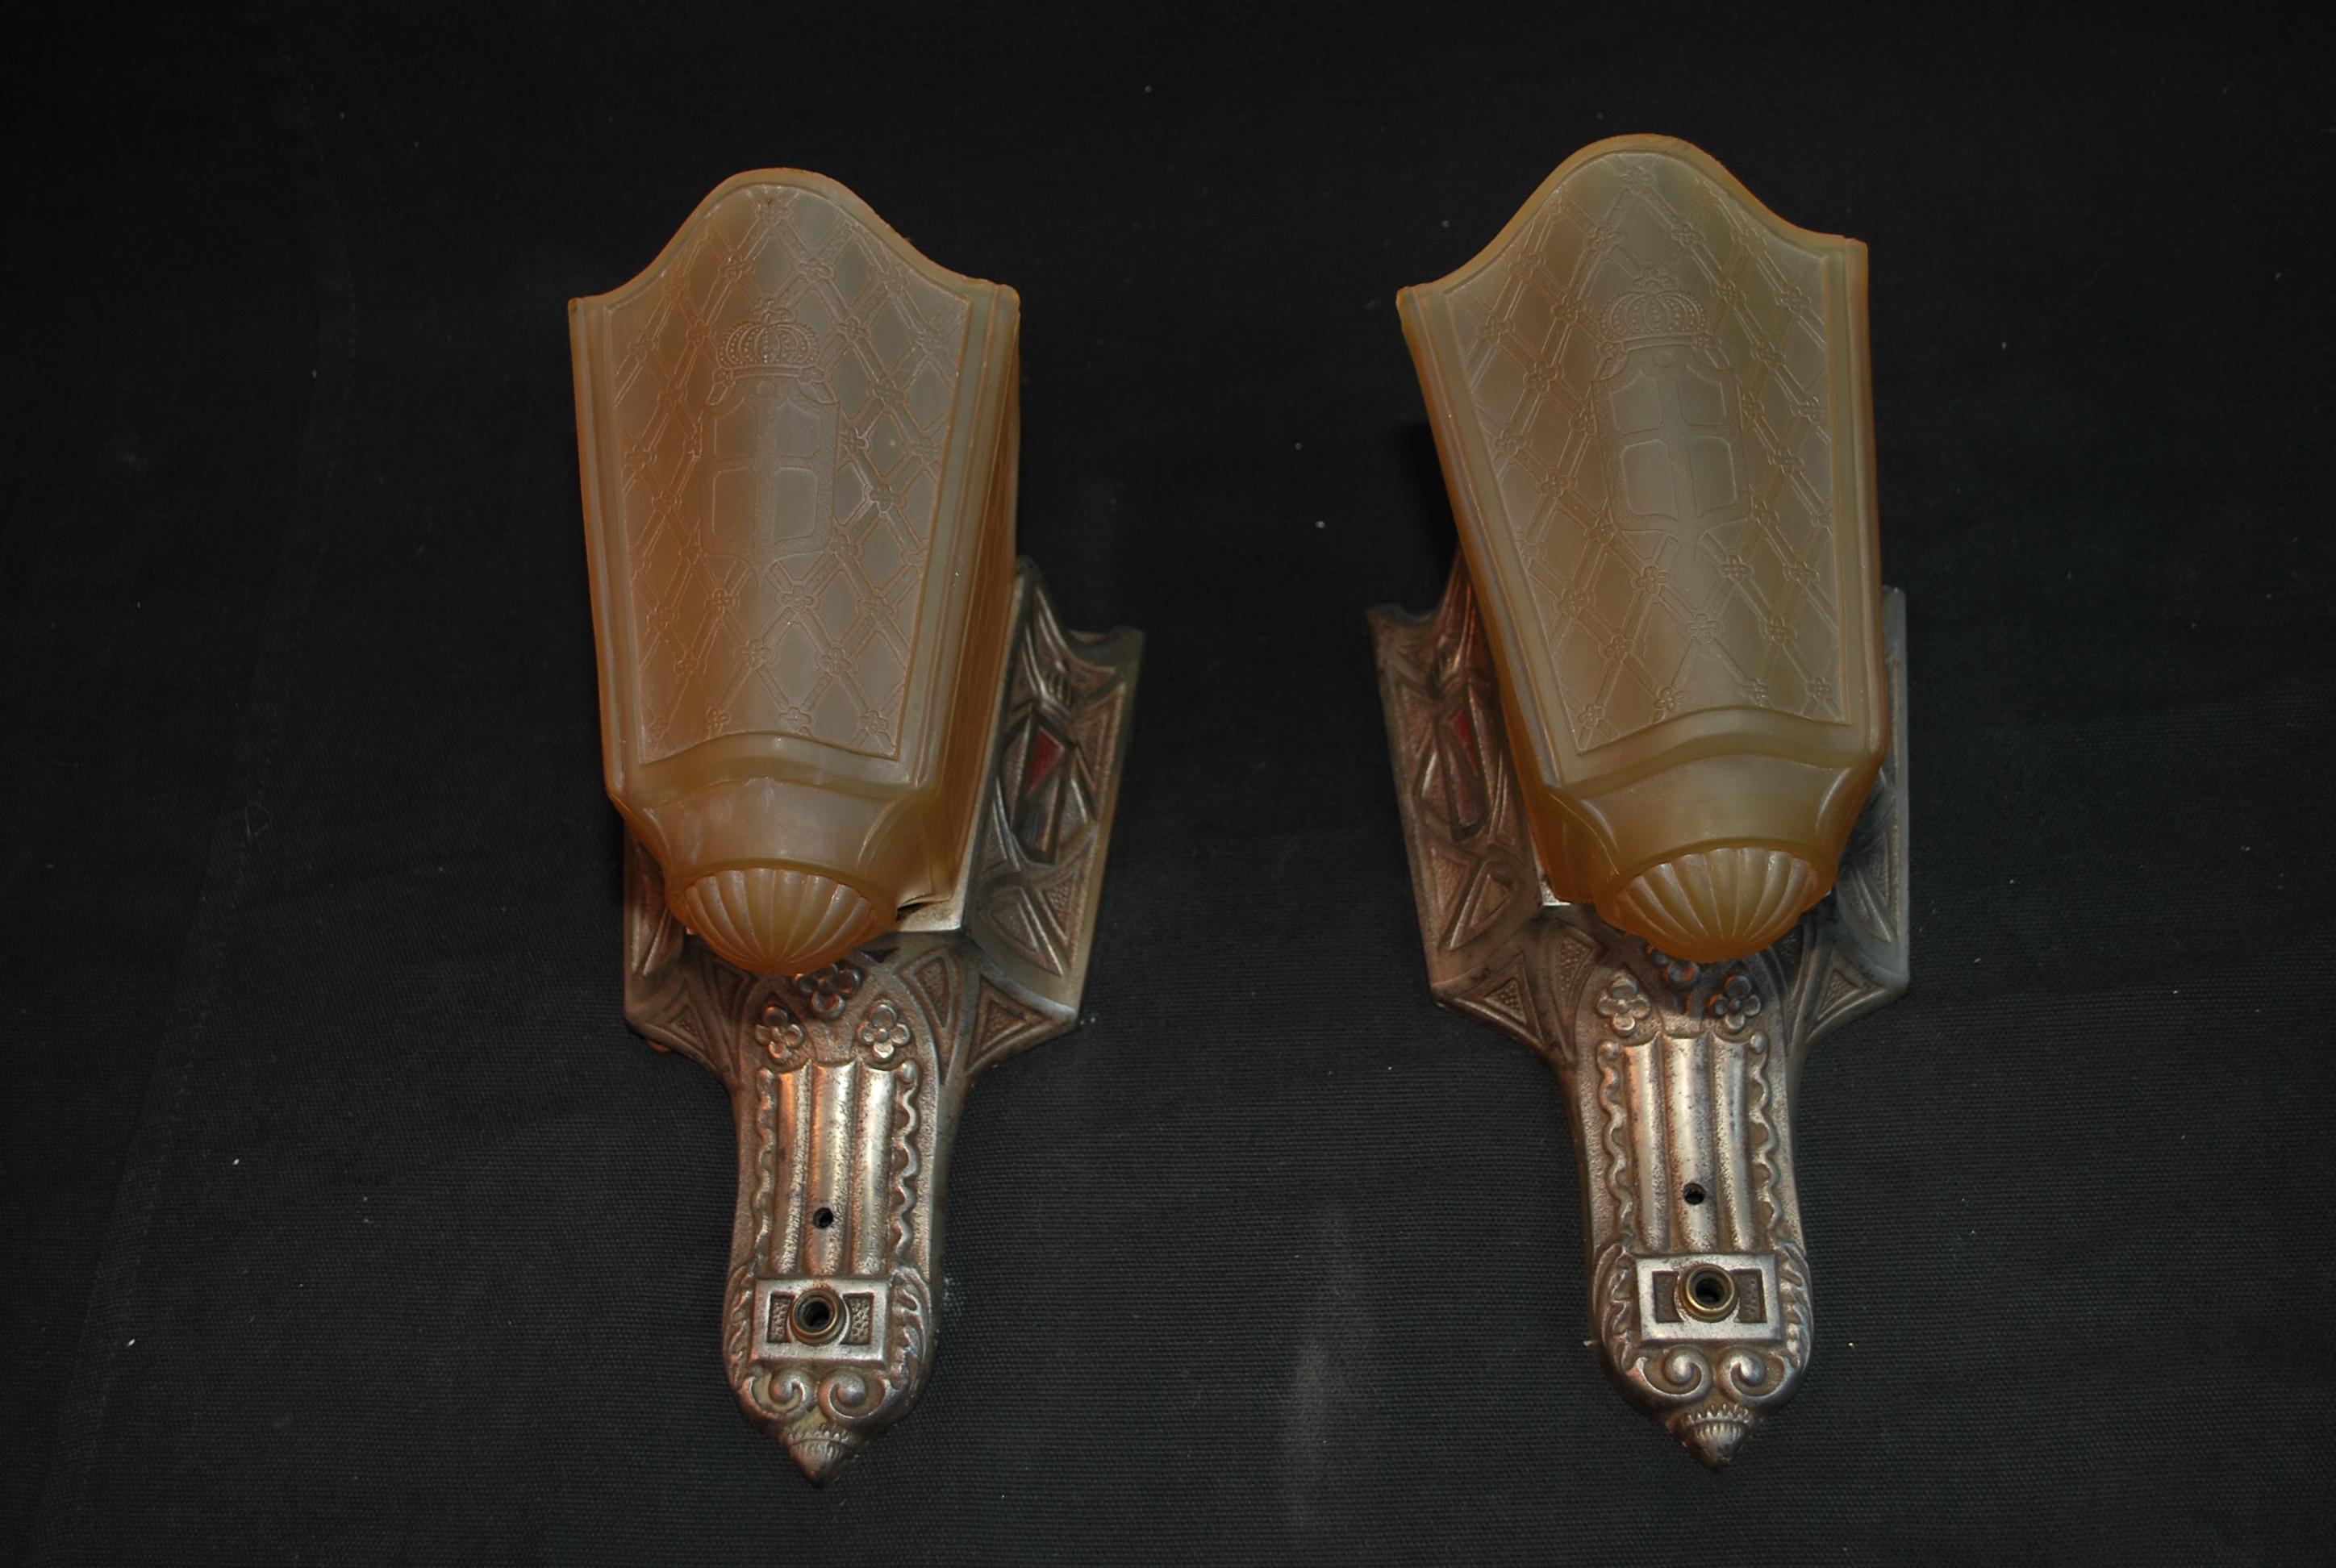 A beautiful pair of Art deco sconces, made of cast iron with a silver plated coating, they are made of qualities , the shades have beautiful  engraving